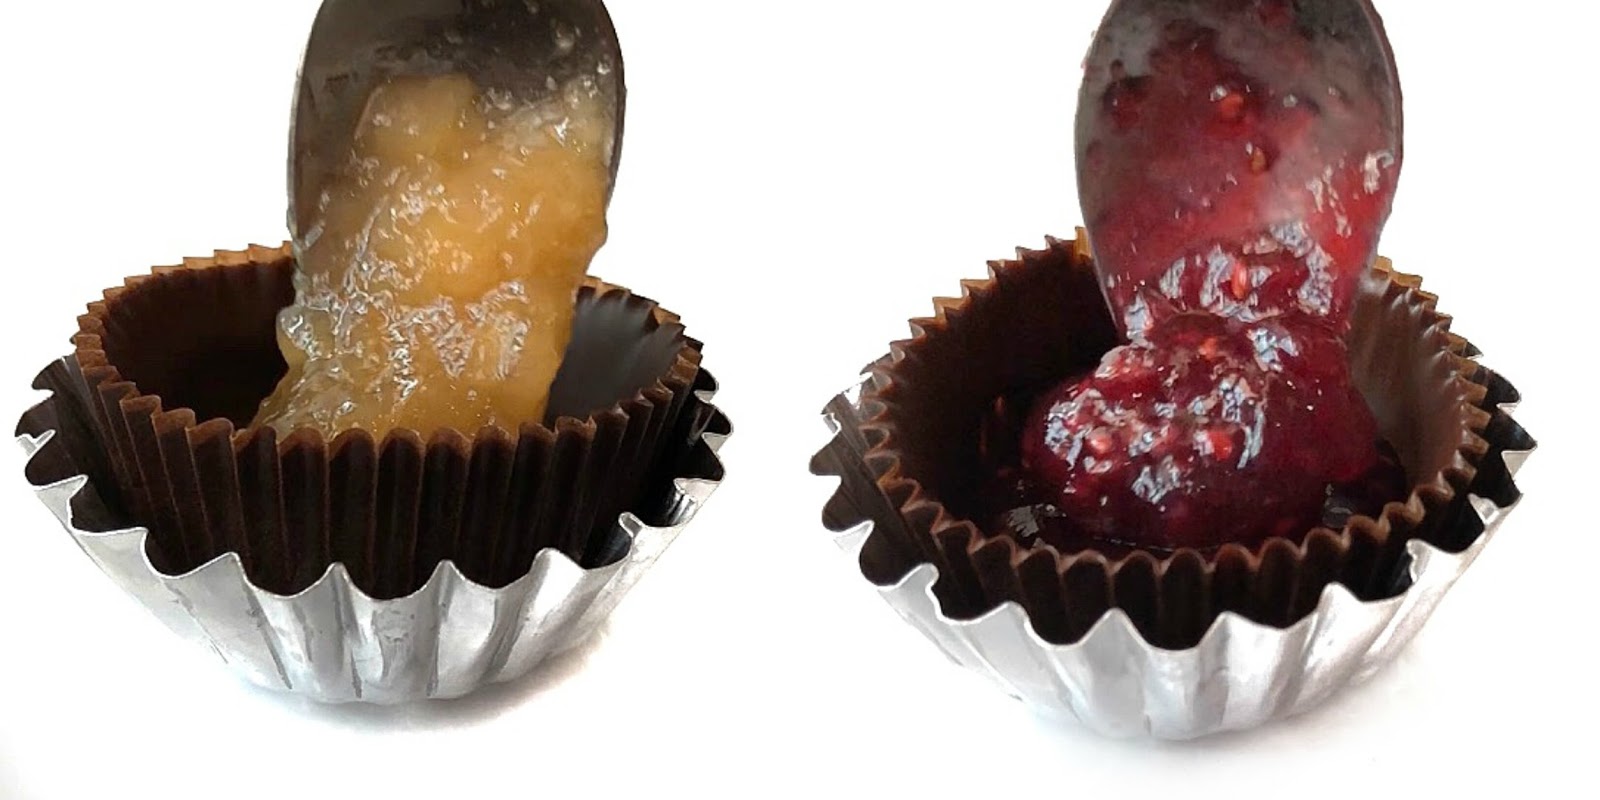 Filling chocolate cups with apple pie filling and raspberry jam filling